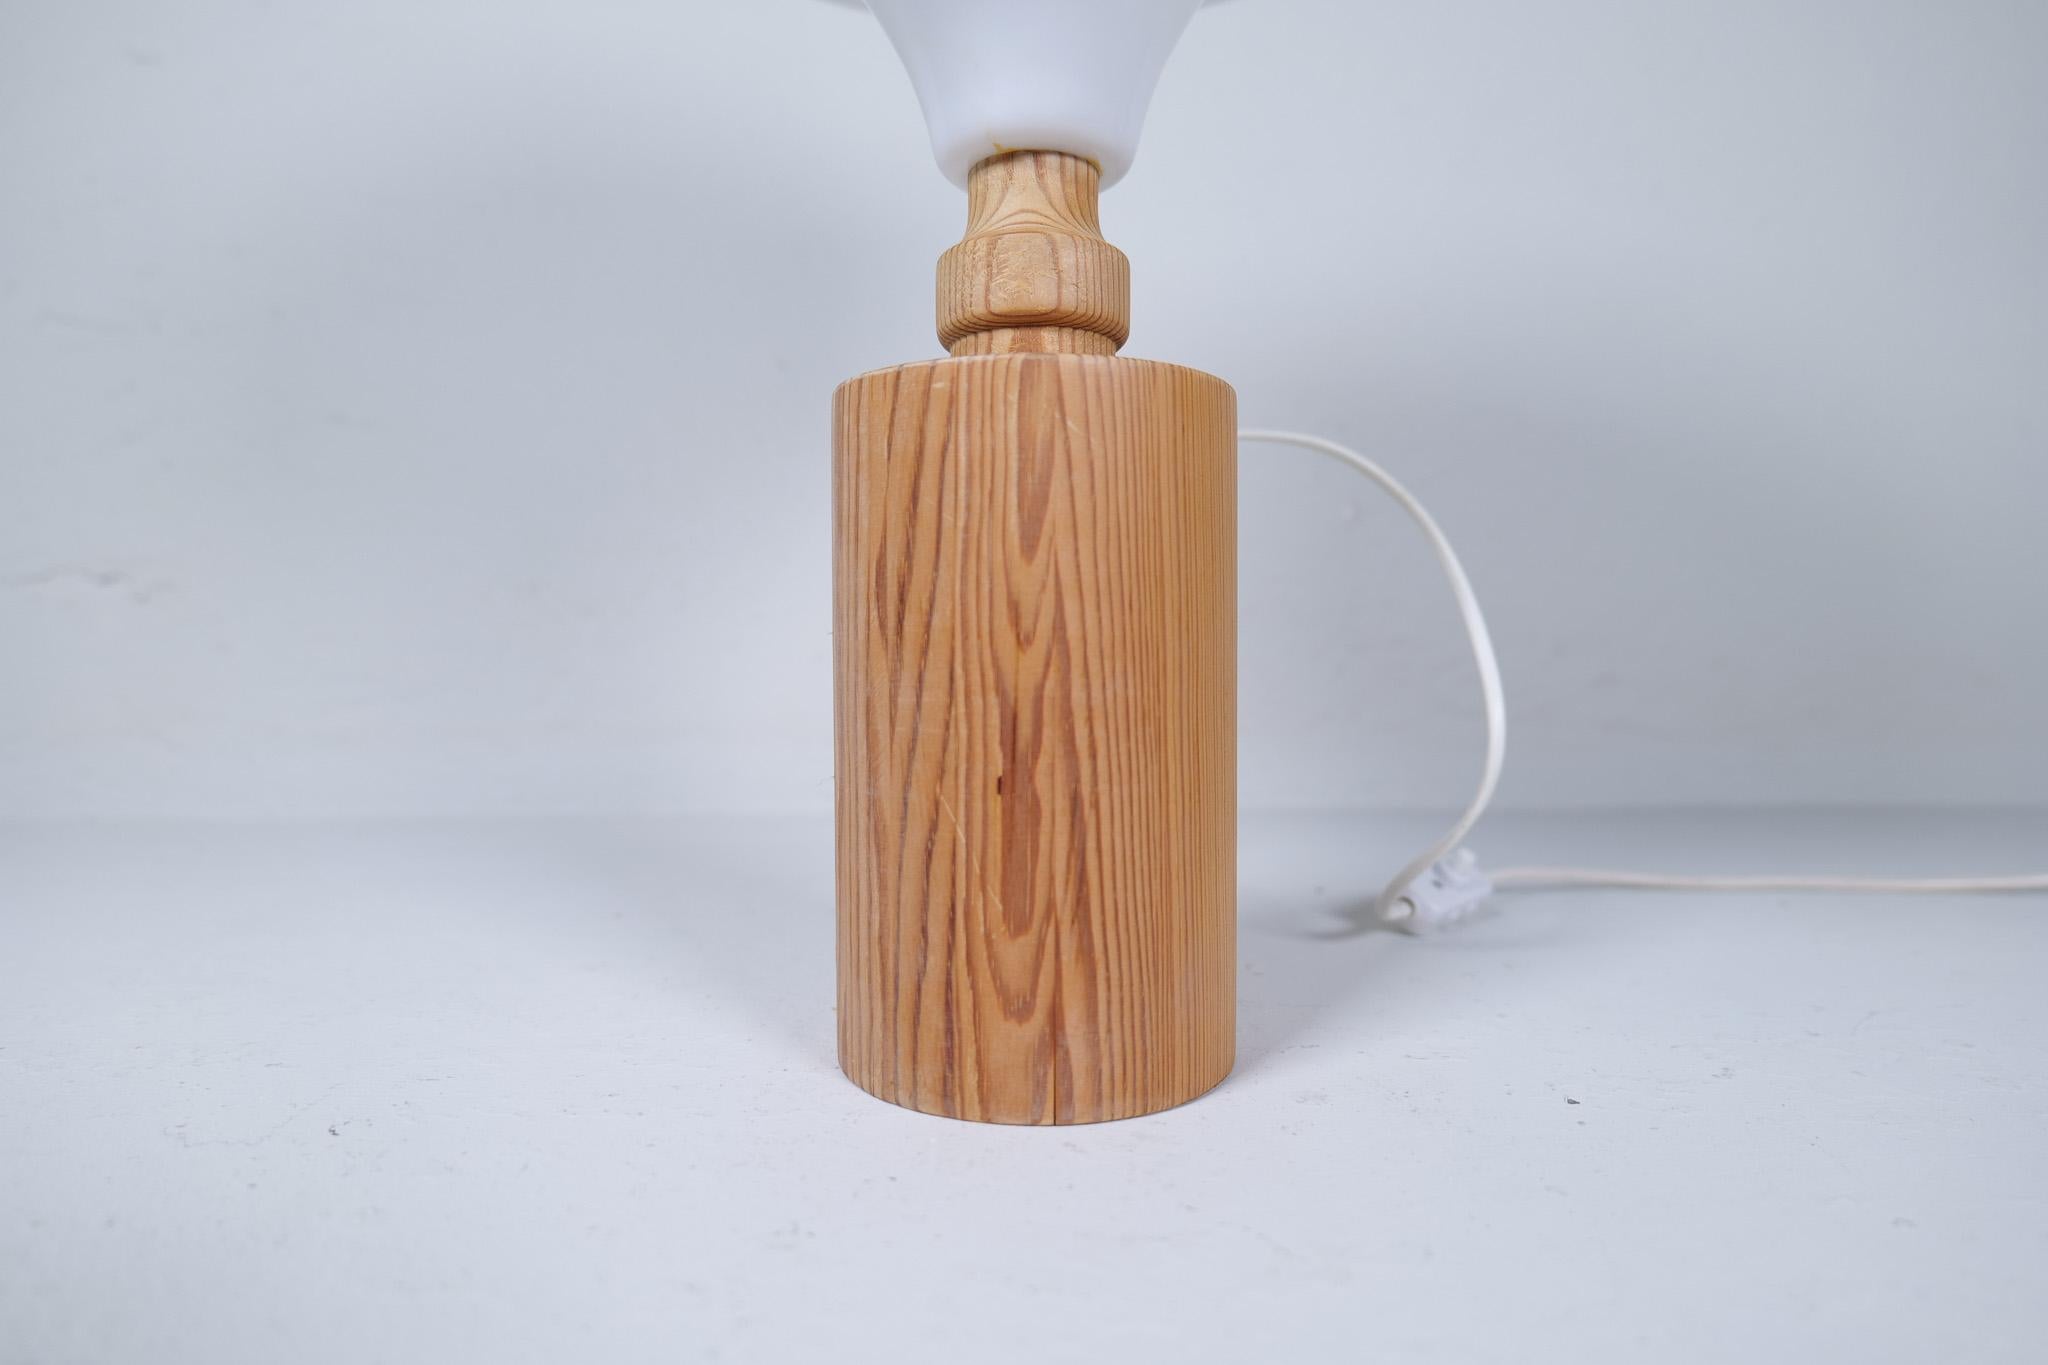 Mid-Century Modern Table Lamp in Pine and Acrylic, Sweden, 1970s For Sale 3